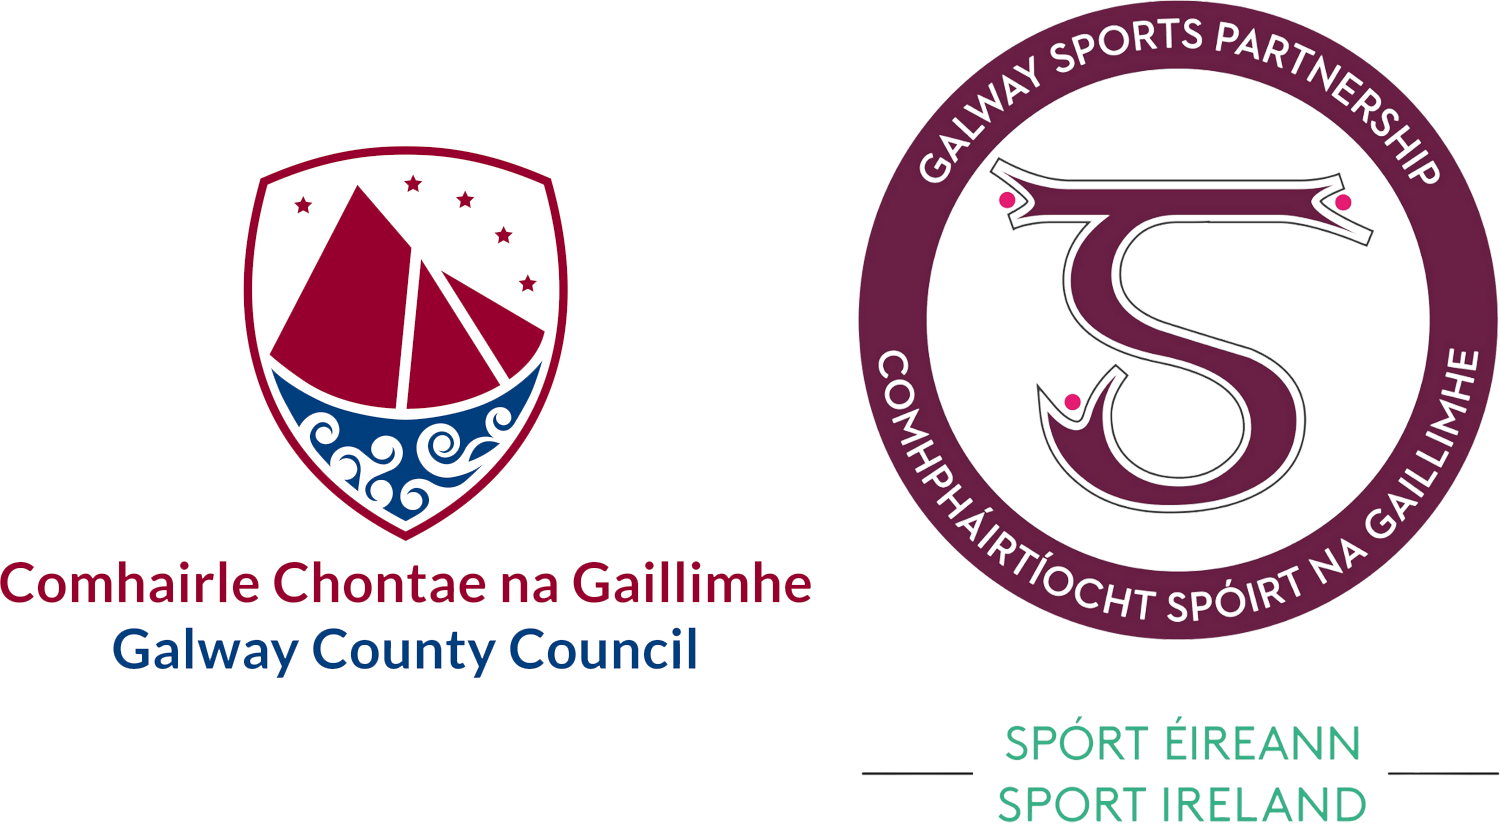 Galway County logo